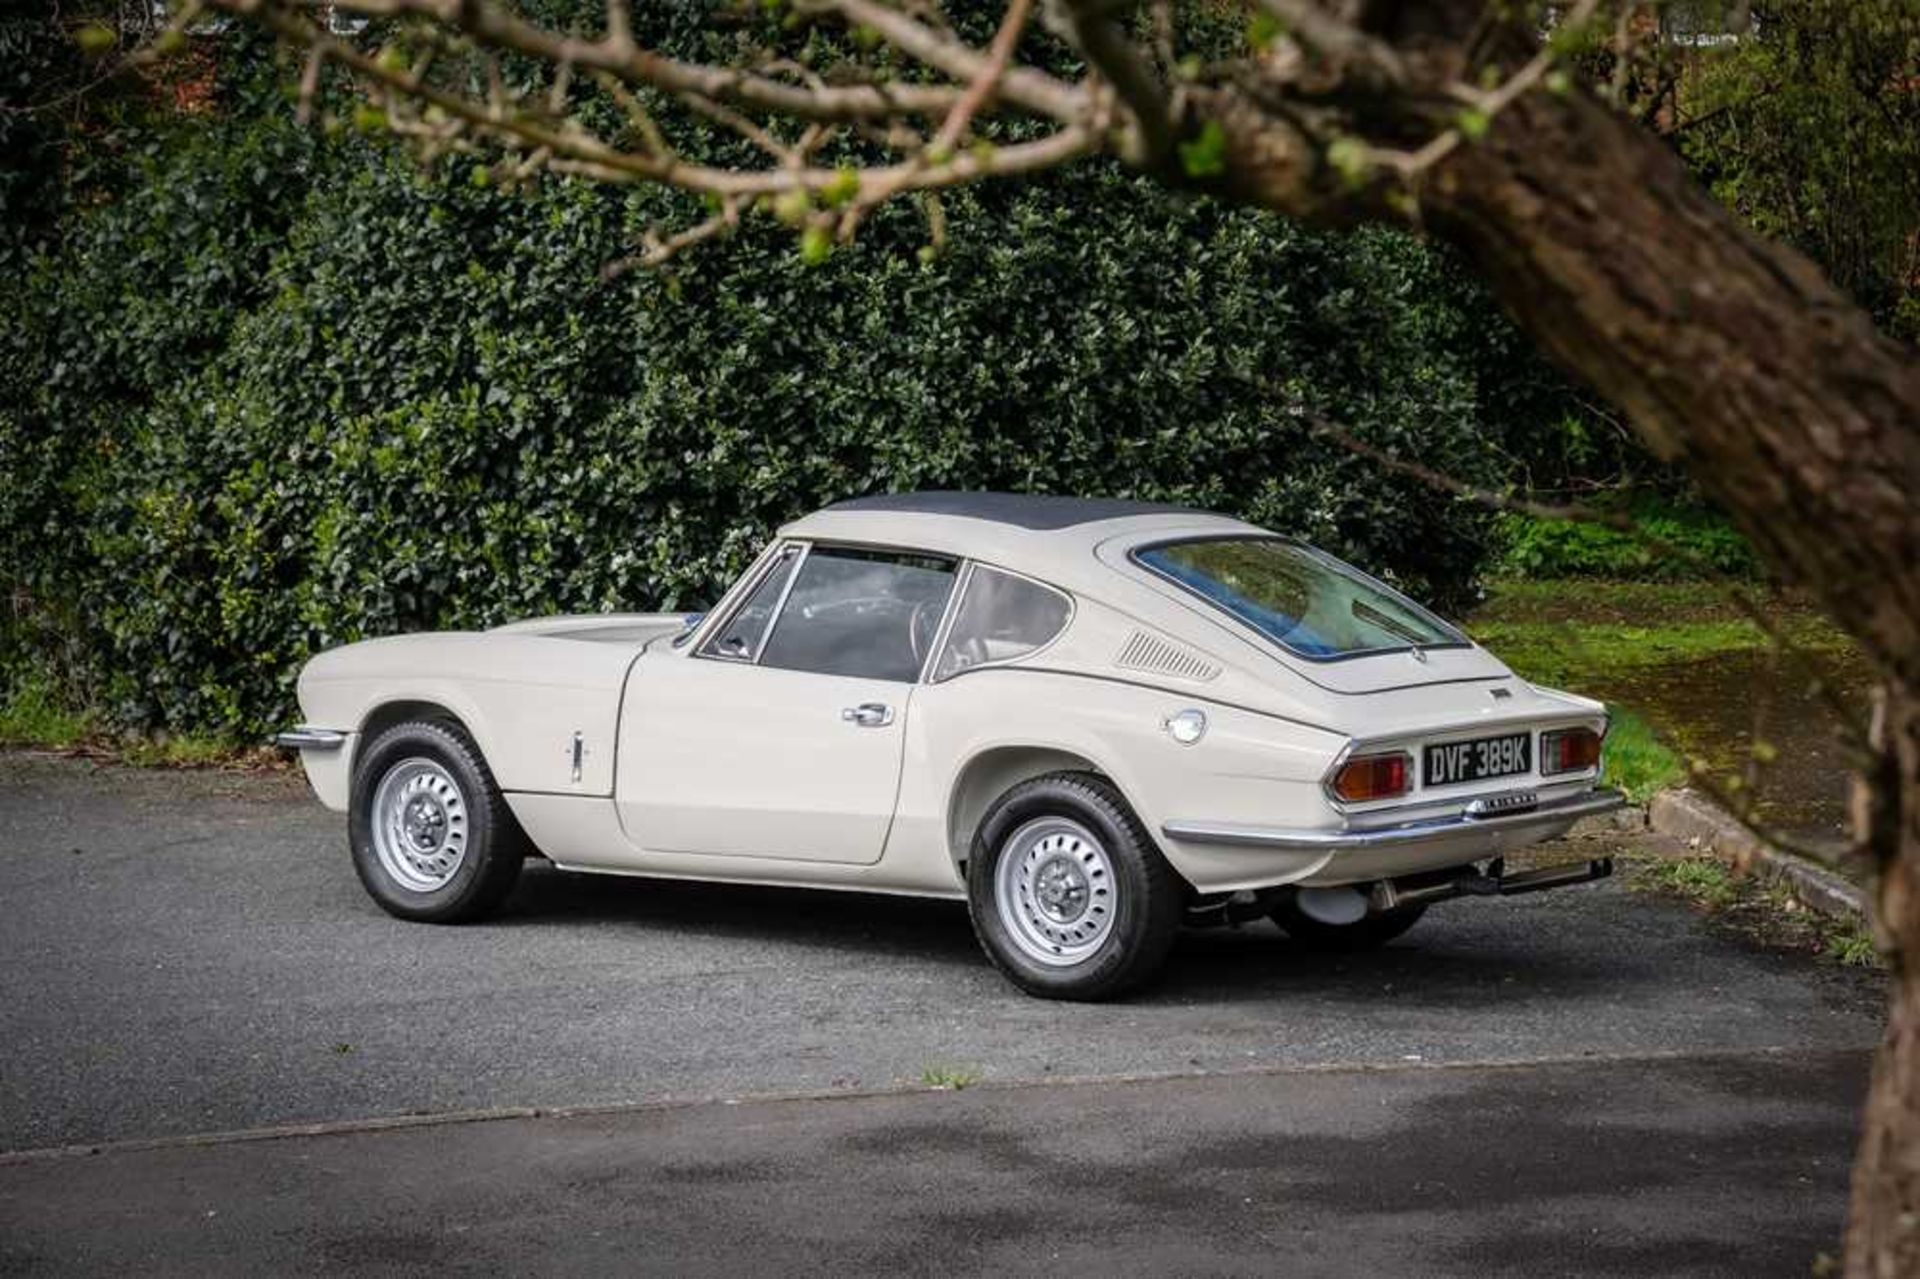 1971 Triumph GT6 MkIII Fresh from a full professional restoration - Image 19 of 106